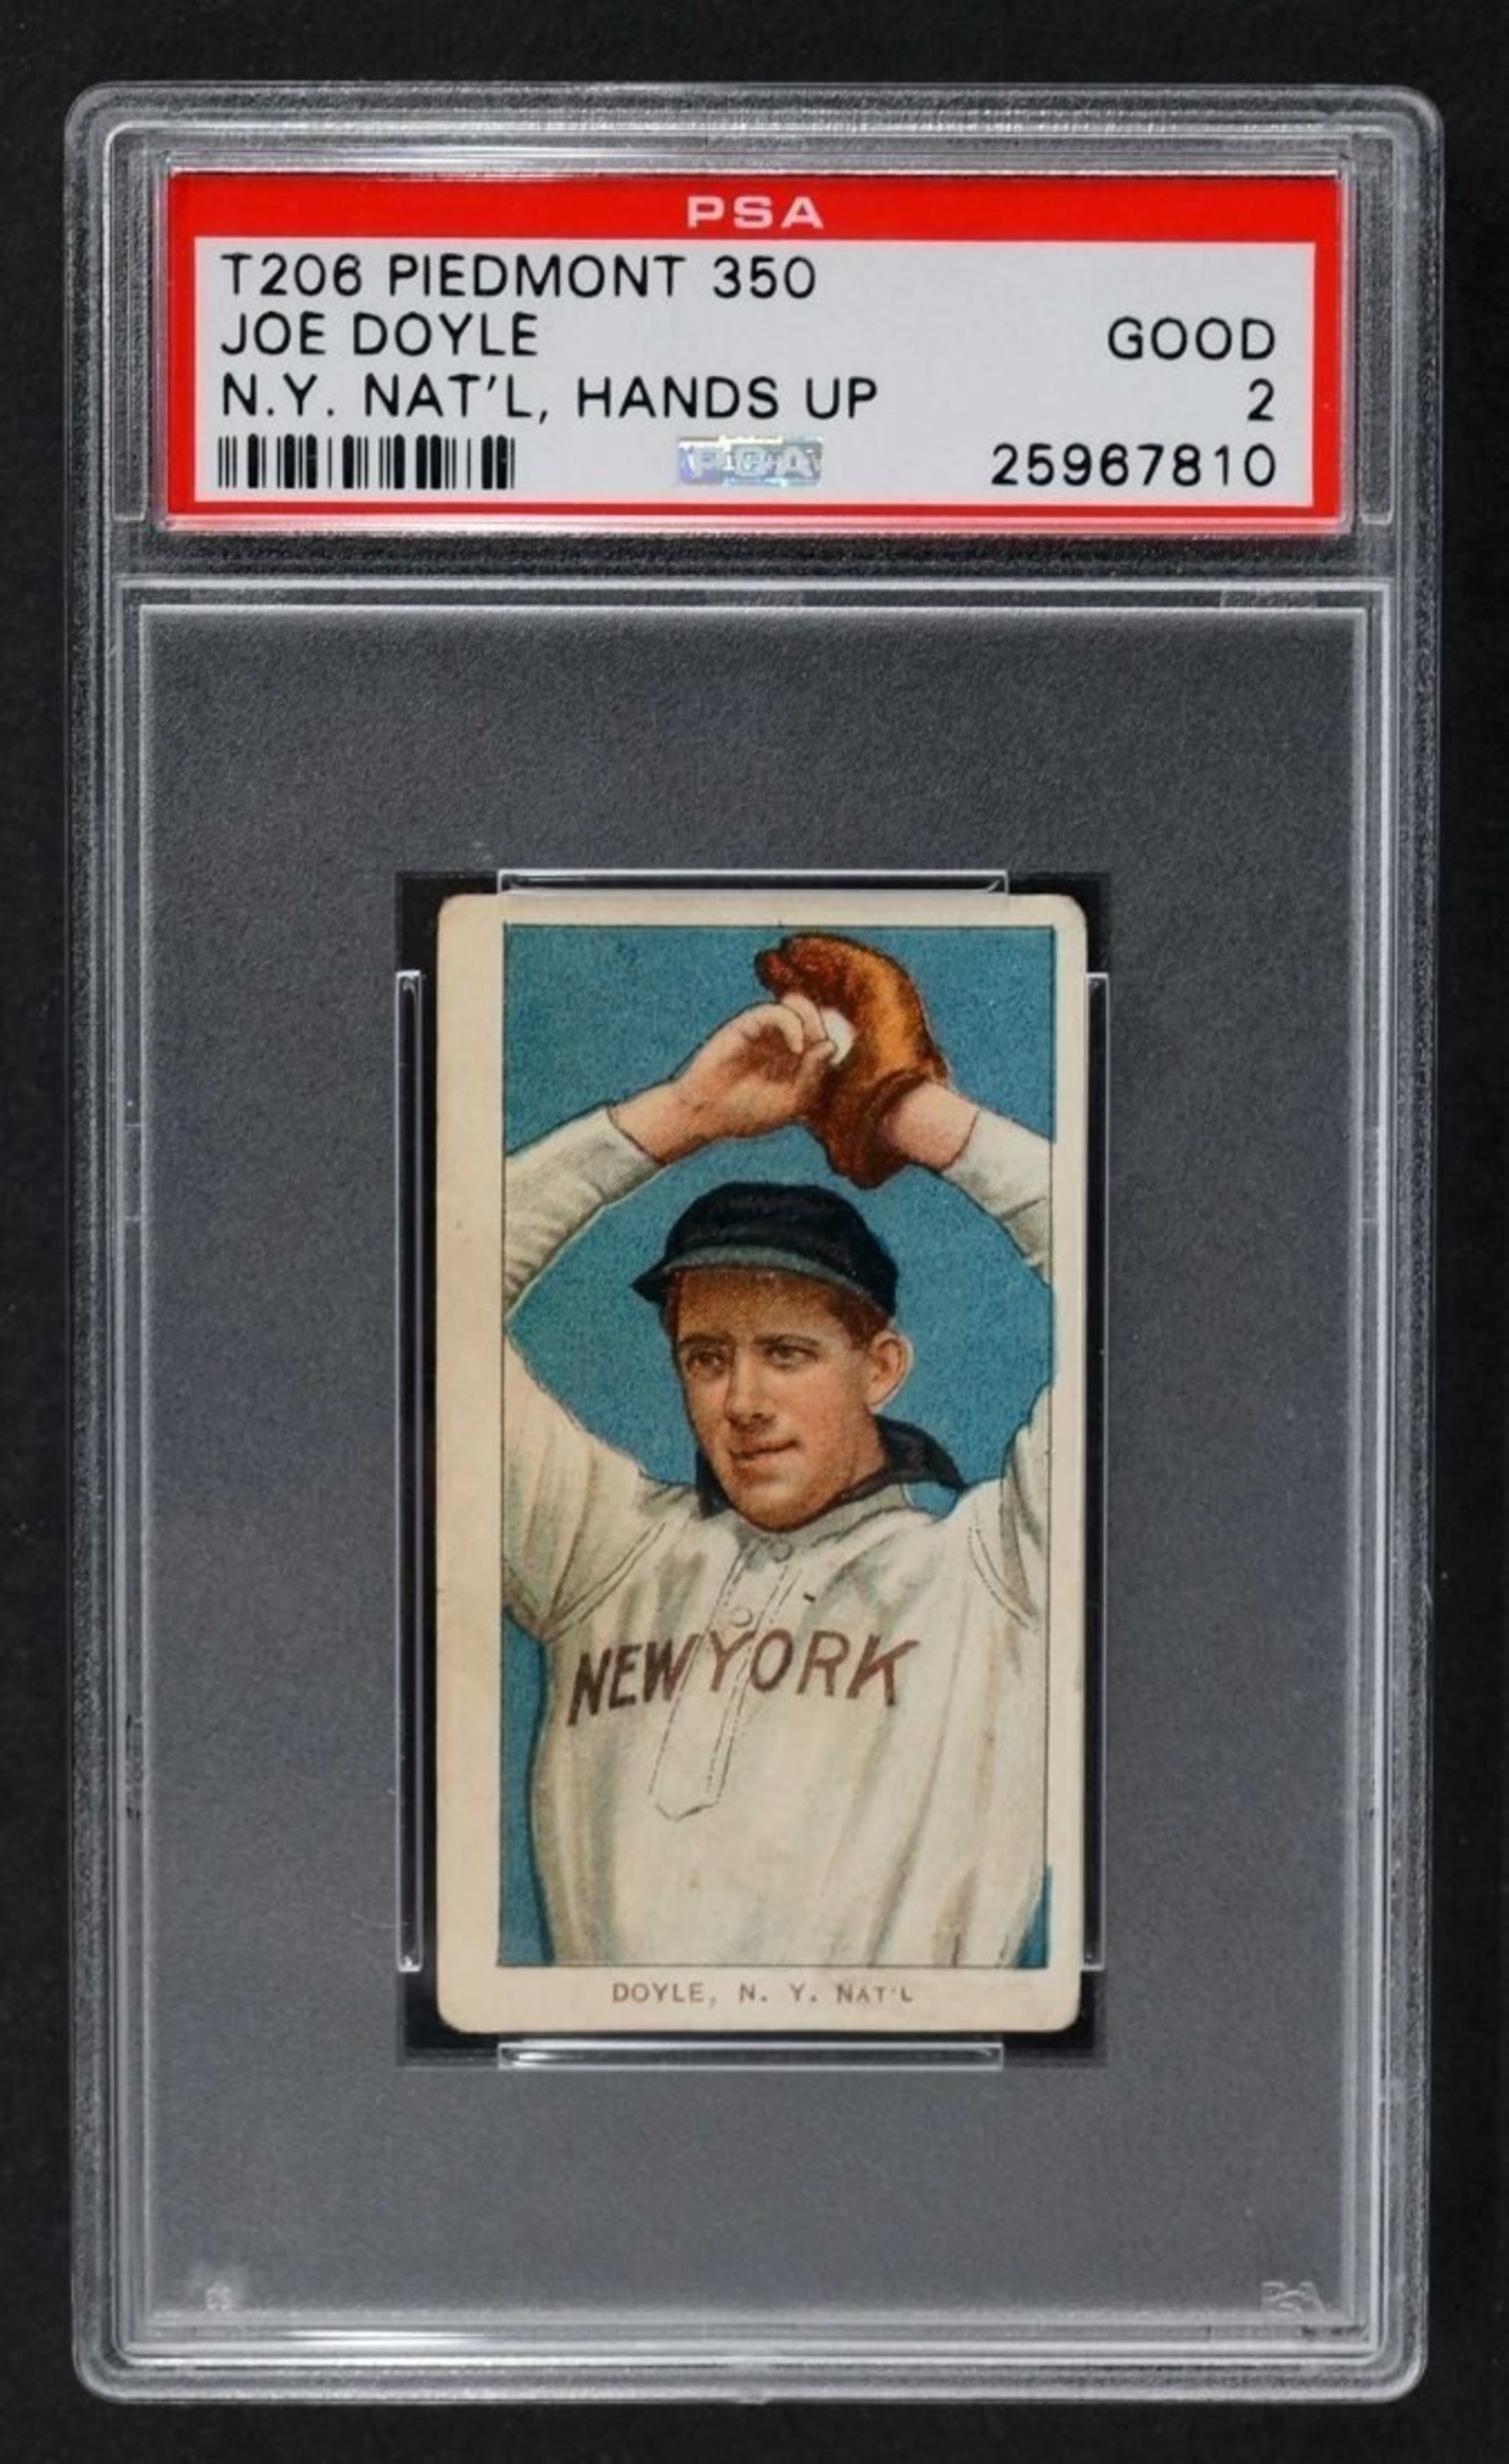 T206 Piedmont Joe Doyle N.Y. Nat'l Hands Up error baseball card to be auctioned Aug. 18, 2016. Estimate: $100,000-$200,000. MBA Seattle Auction House image